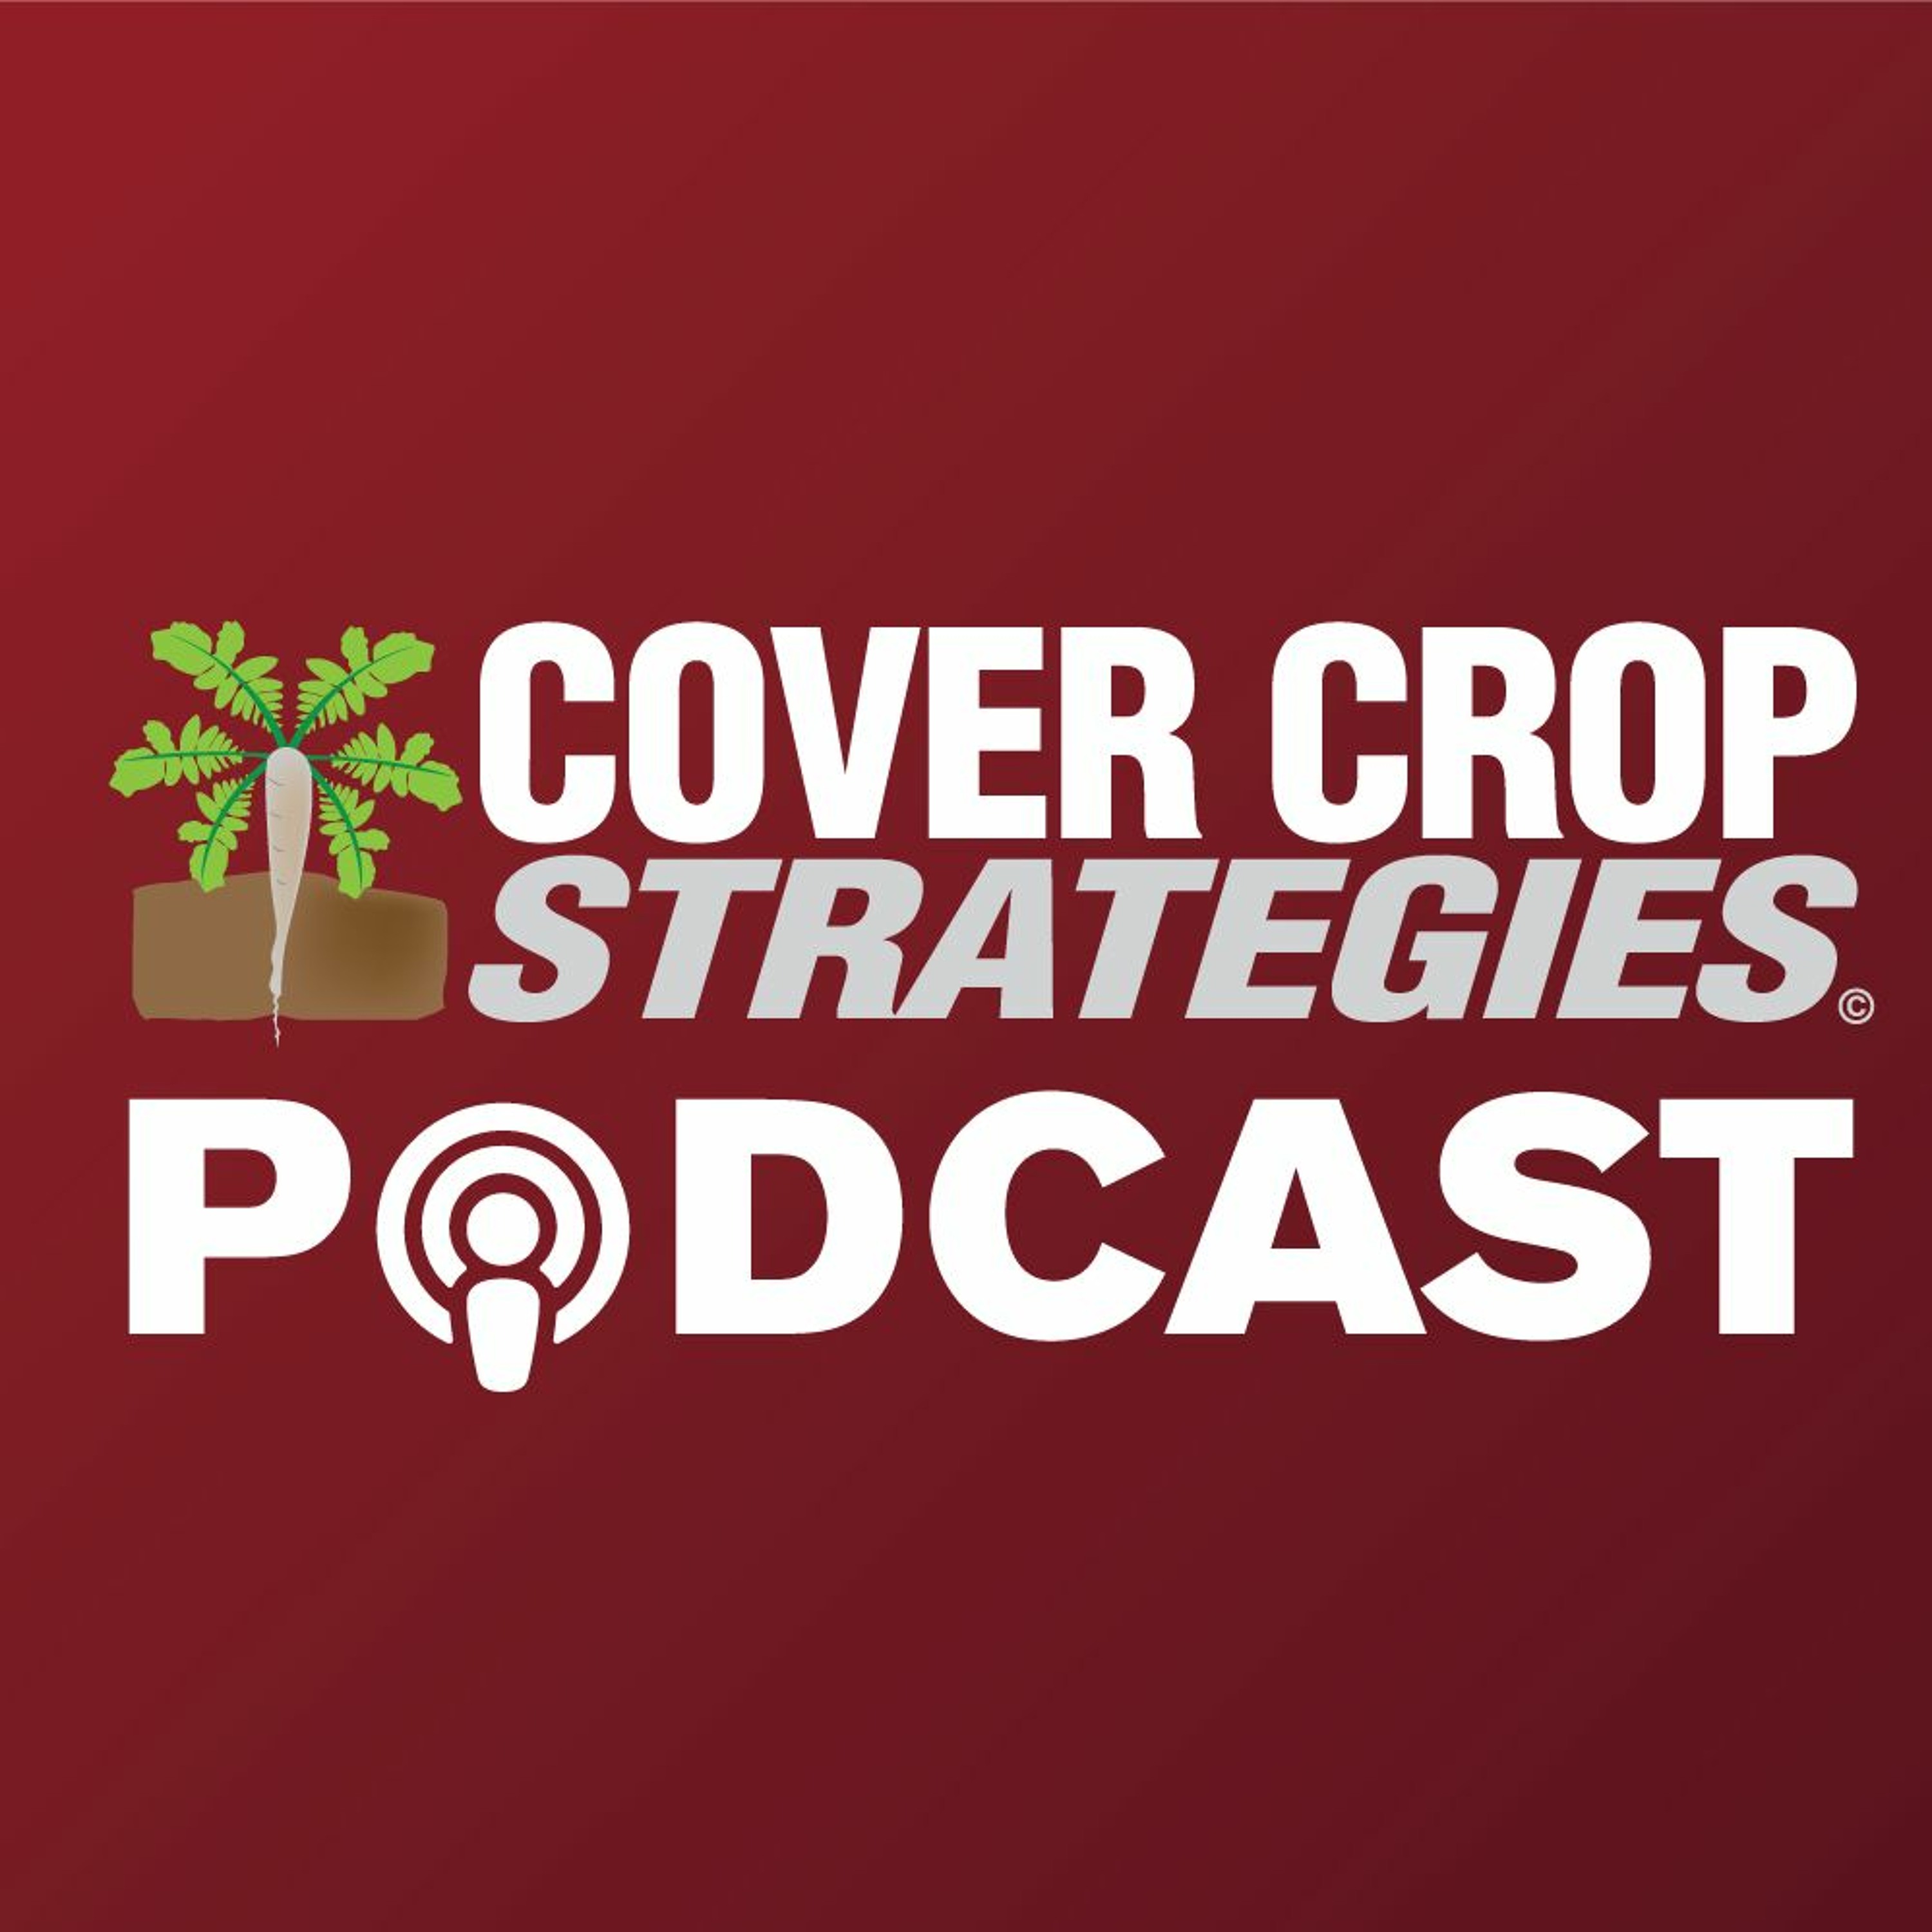 5 Reasons You Should Plan 12 Months in Advance for Cover Crops